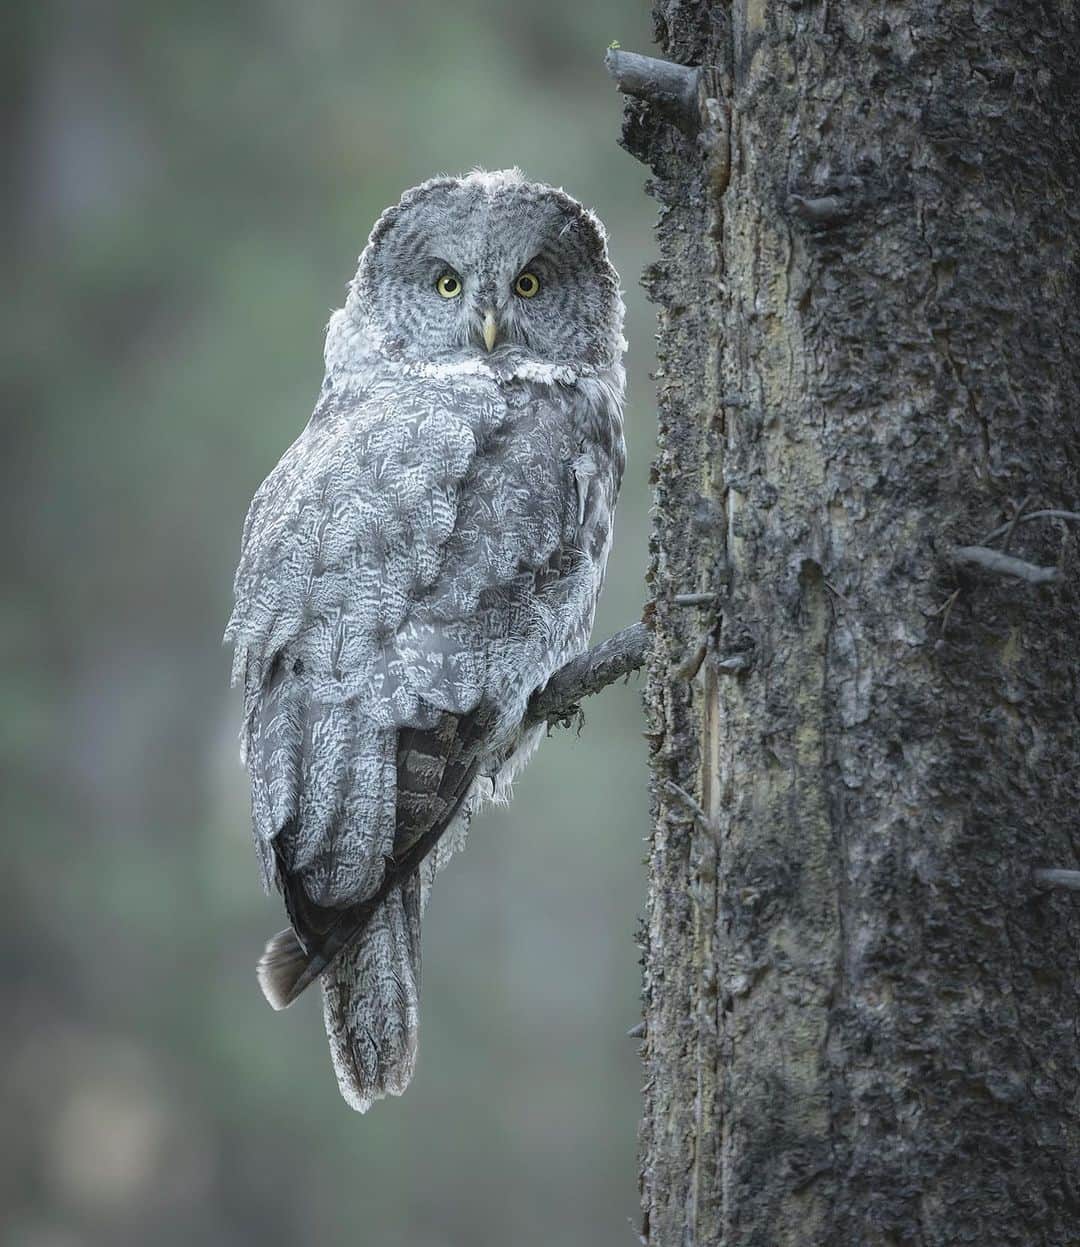 Chase Dekker Wild-Life Imagesのインスタグラム：「Had some fun reliving this day with 3 great gray owls as I finally got around to editing the shots from the encounters. Yellowstone is such a massive place and to find 3 of these elusive birds deep within its forests make the images that much more special.」